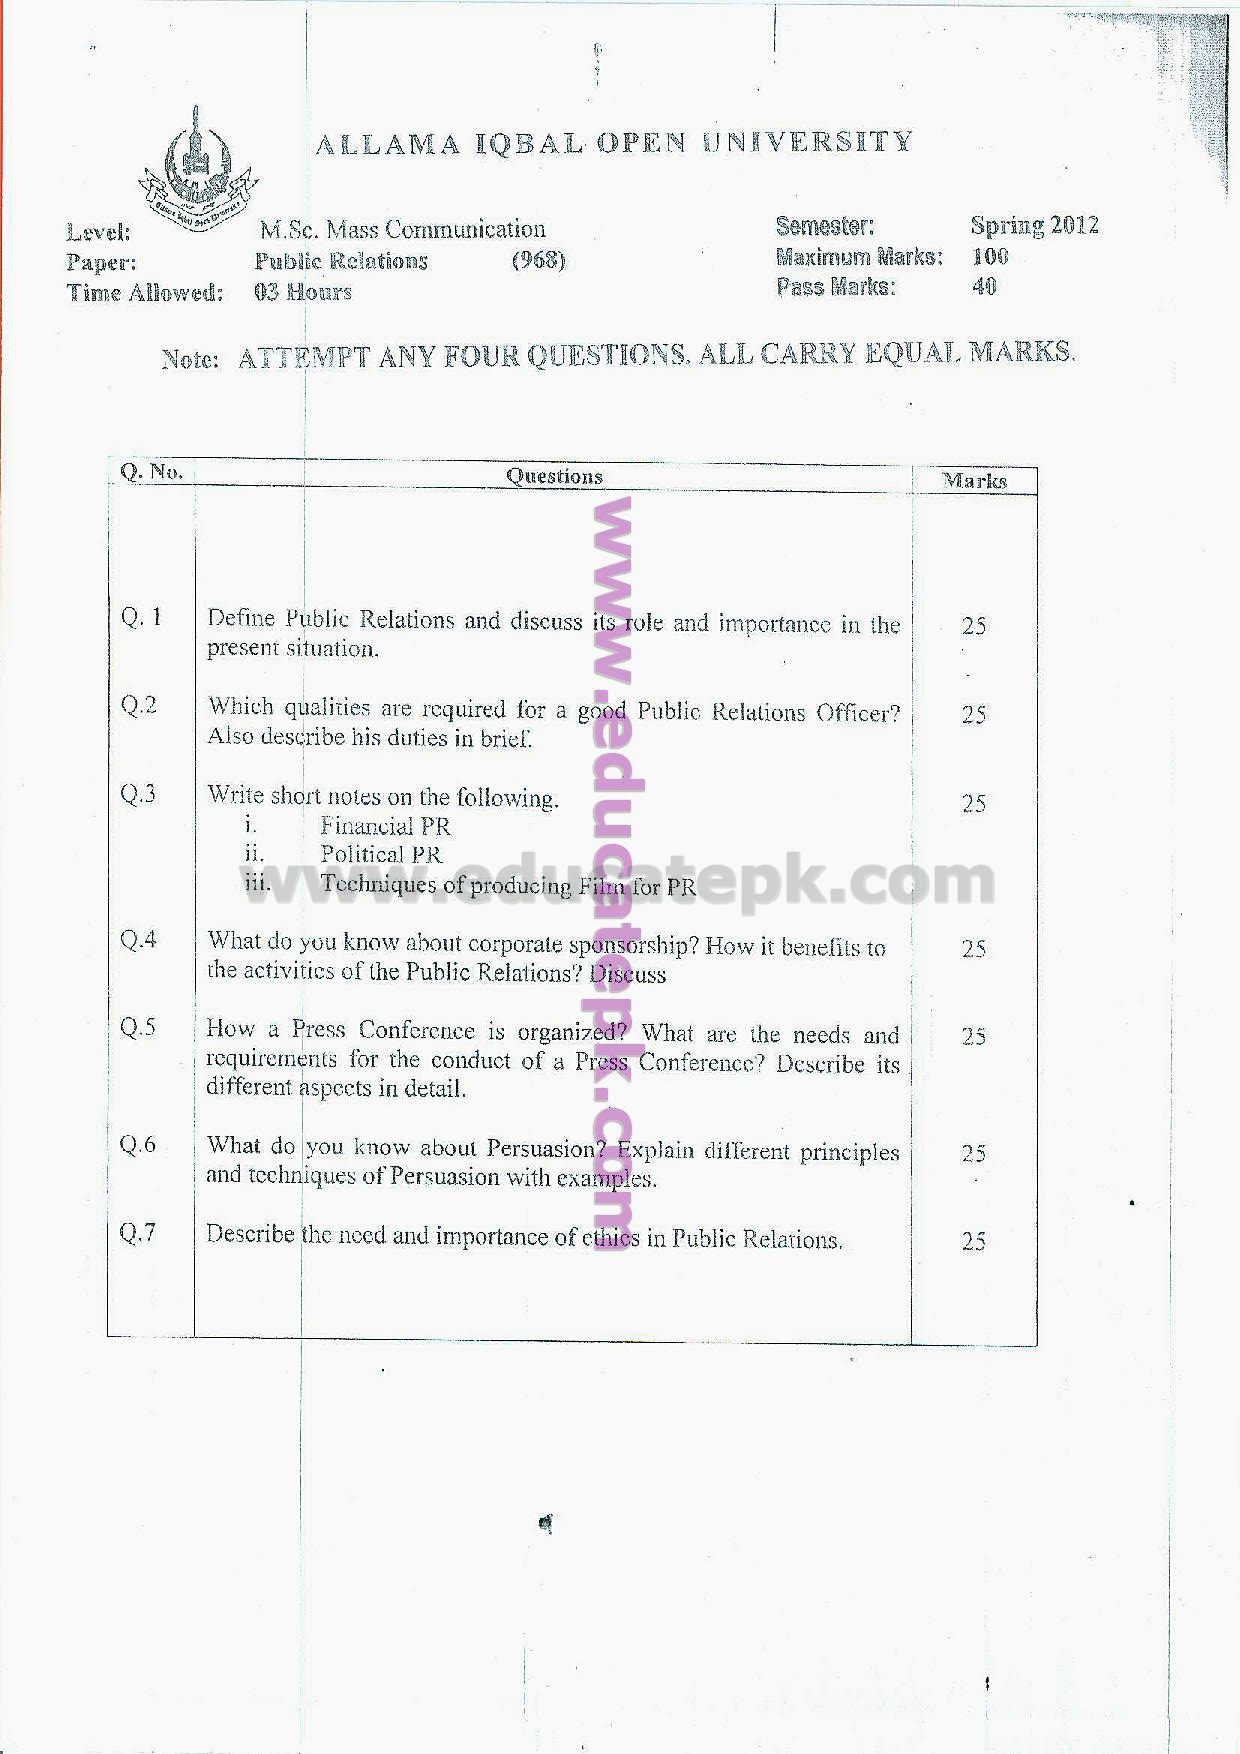 AIOU-Public Relation Past Paper of Spring 2012 Semester